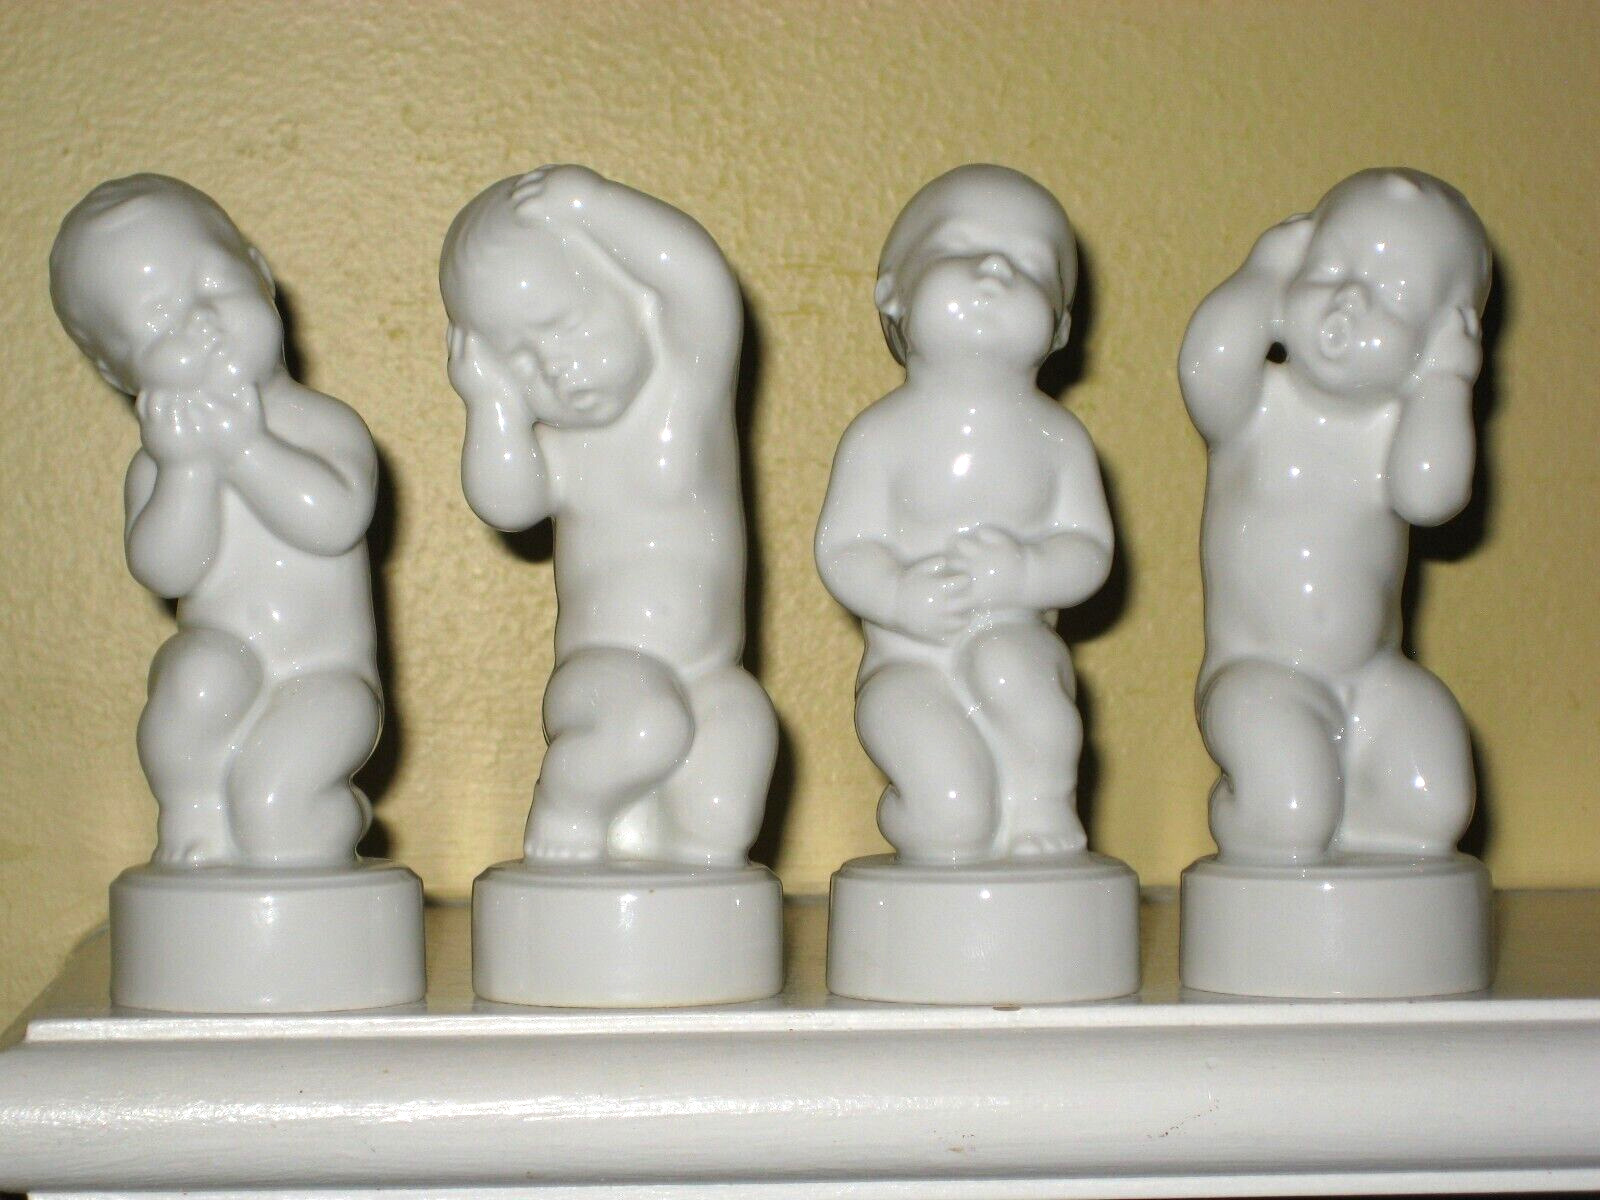 Vtg Bing Grondahl Figurines THE 4 ACHES Babies by Sven Lindhart Denmark MINT